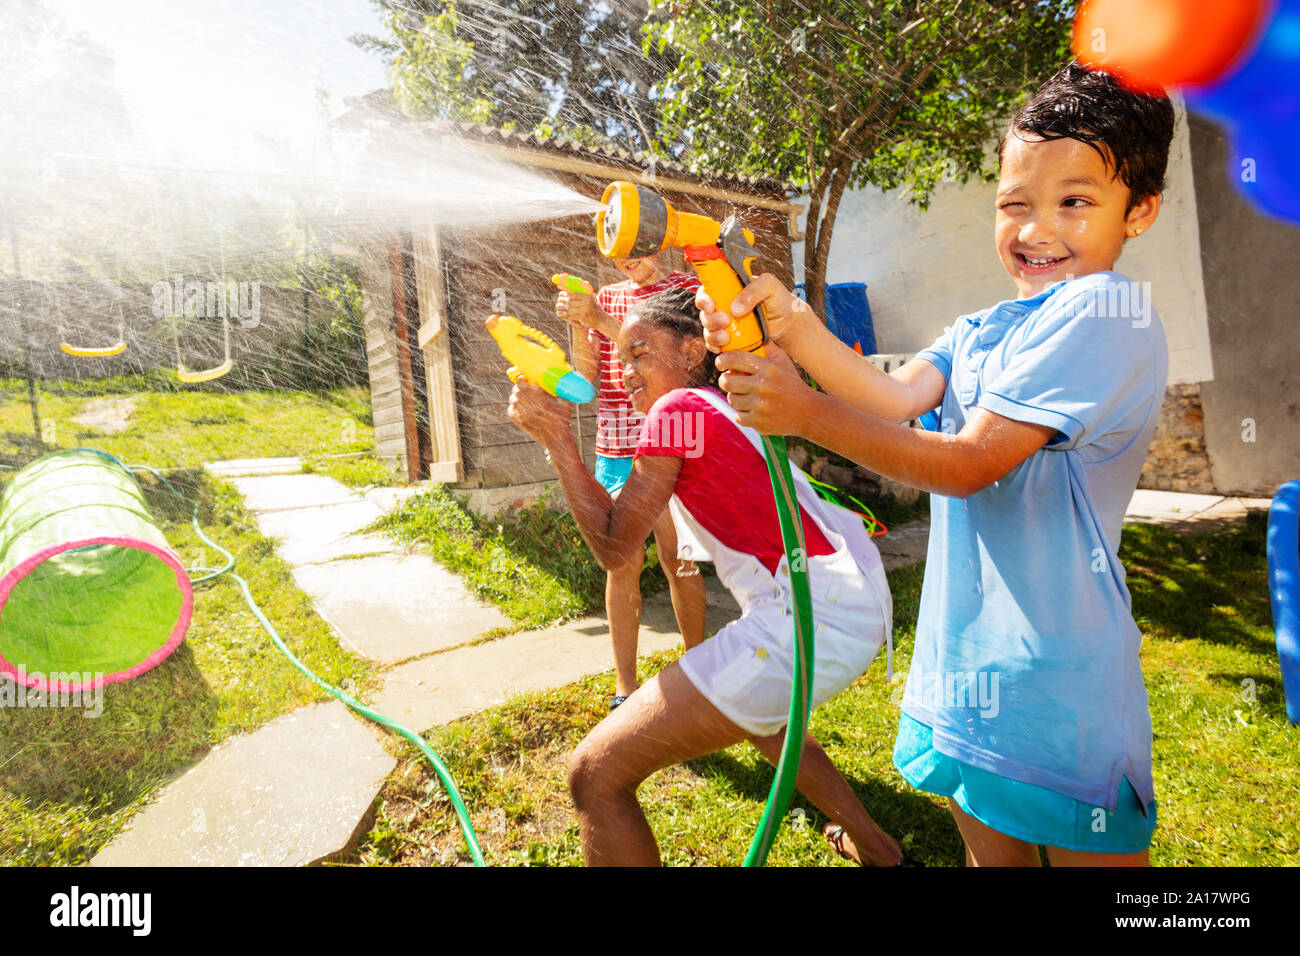 Fun active game of water gun fight with boy showing grimace strong  expression holding garden hose sprayer Stock Photo - Alamy